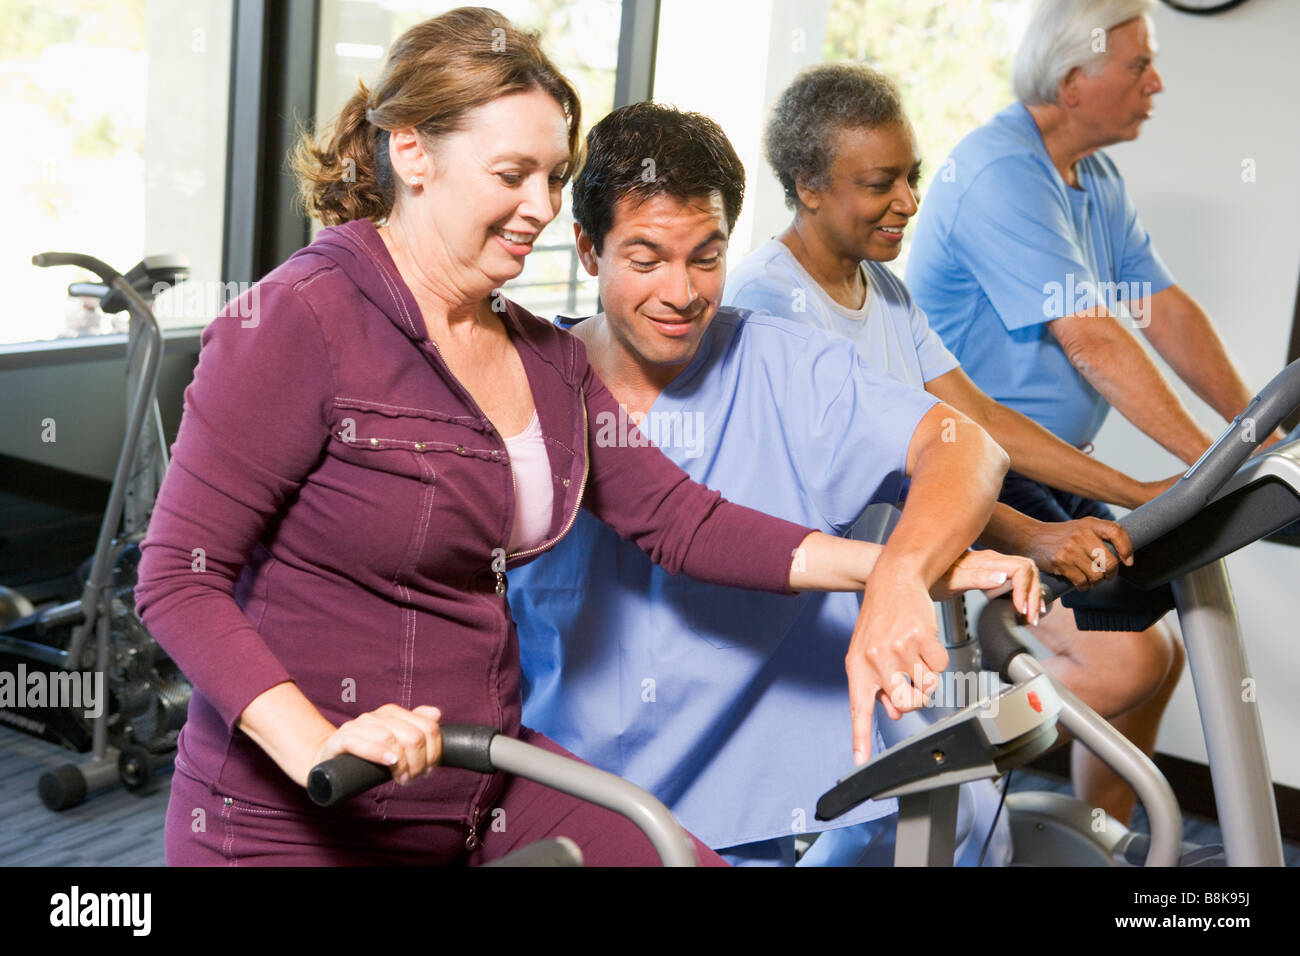 Nurse With Patient In Rehabilitation Using Exercise Machine Stock Photo